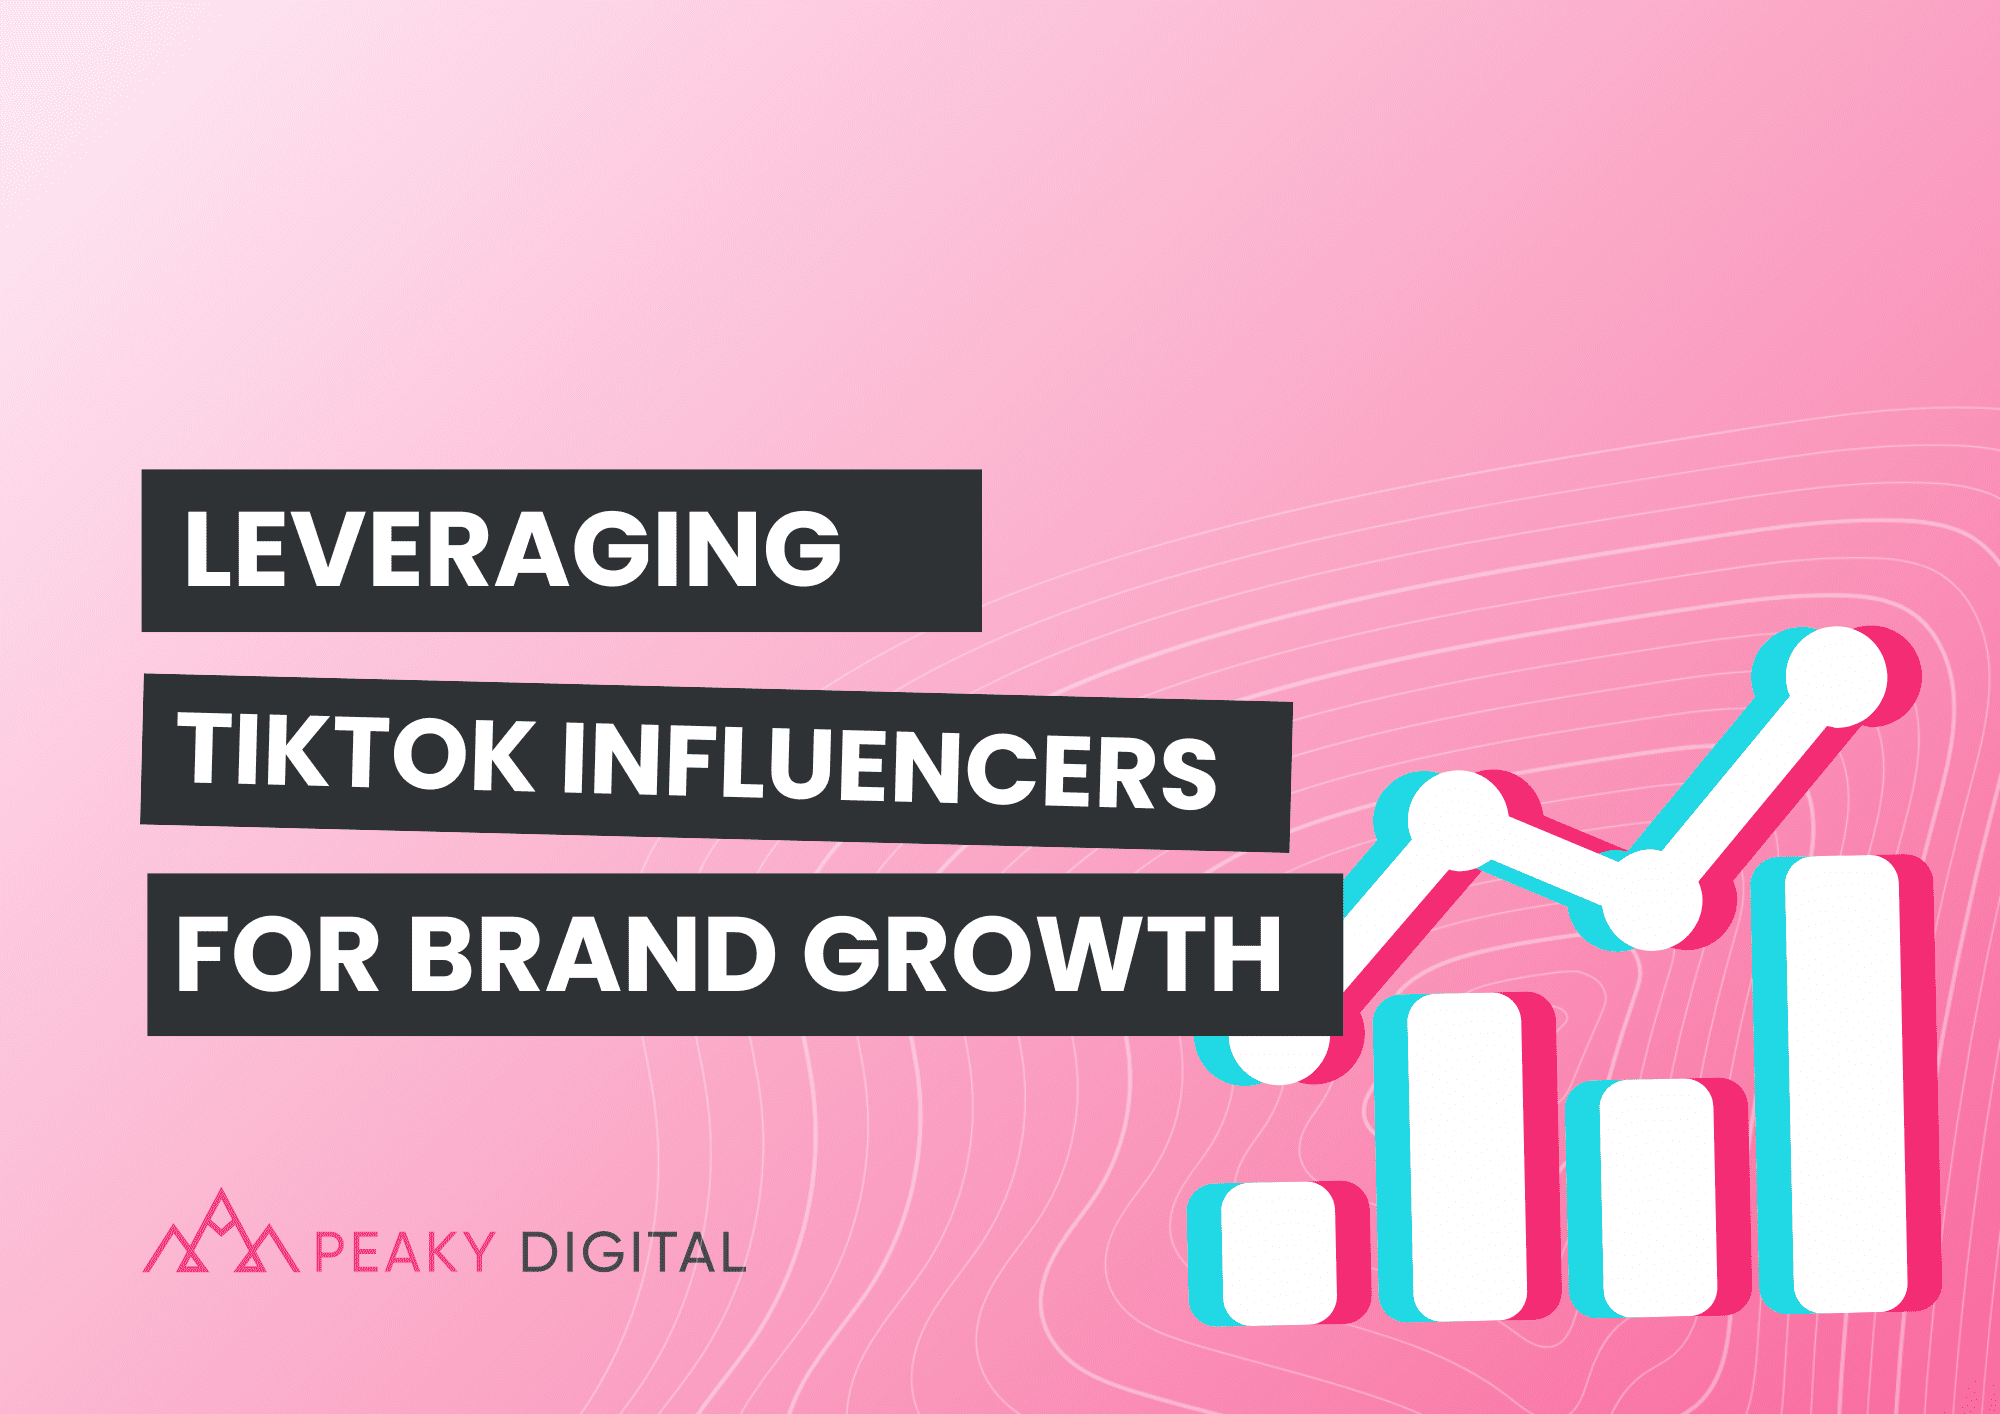 Leveraging TikTok Influencers For Brand Growth